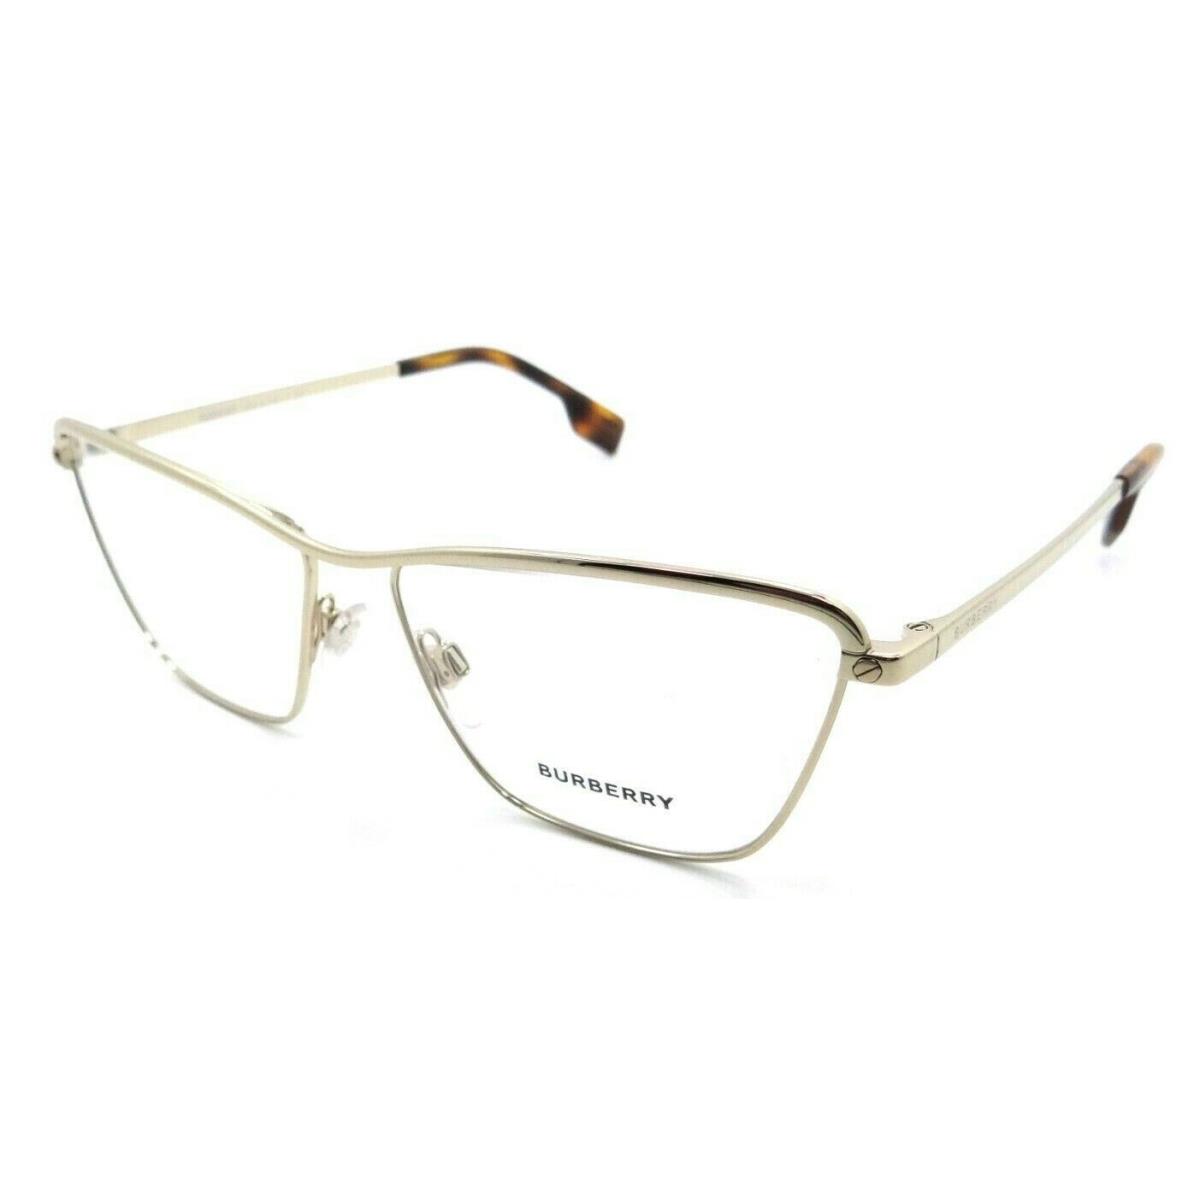 Burberry Eyeglasses Frames BE 1343 1109 57-14-140 Pale Gold Made in Italy